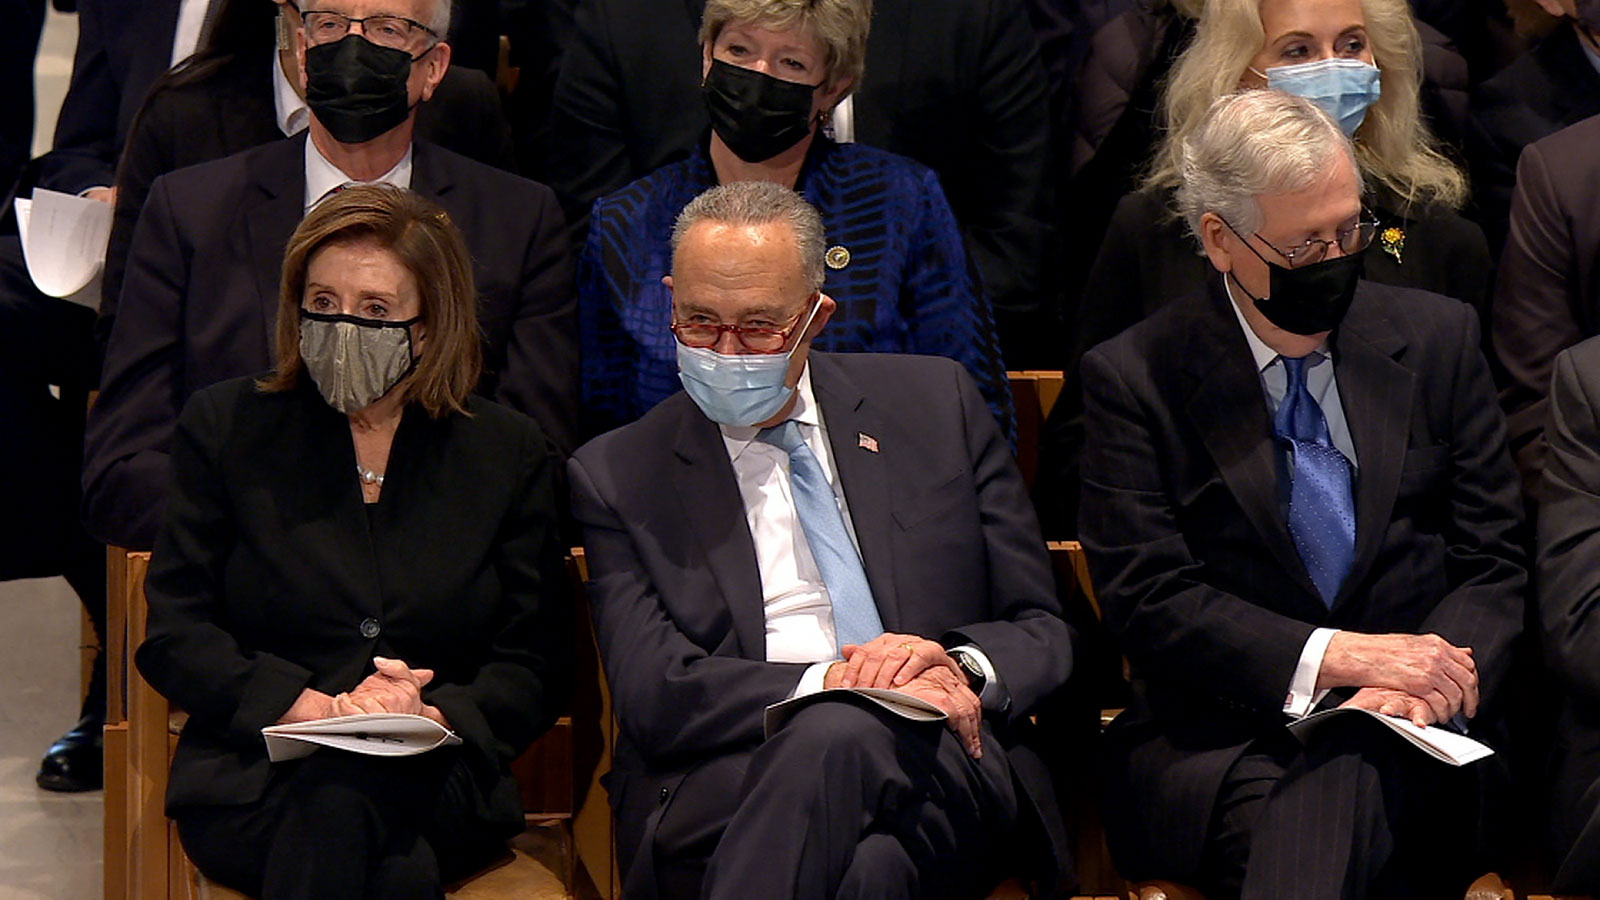 From left, House Speaker Nancy Pelosi, Senate Majority Leader Chuck Schumer and Senate Minority Leader Mitch McConnell attend Dole's funeral on Friday morning.